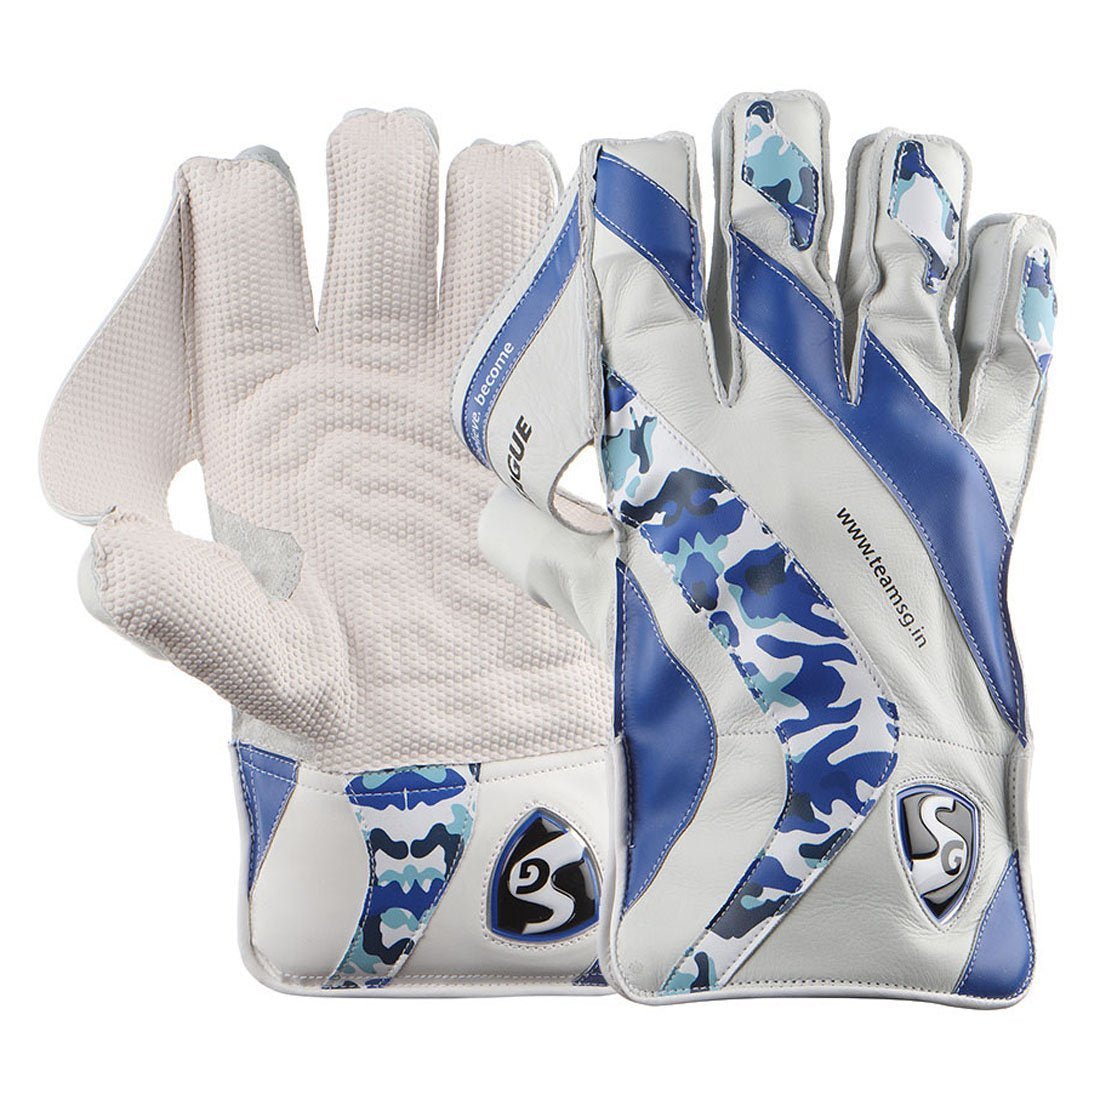 SG League Cricket Wicket Keeping Gloves.